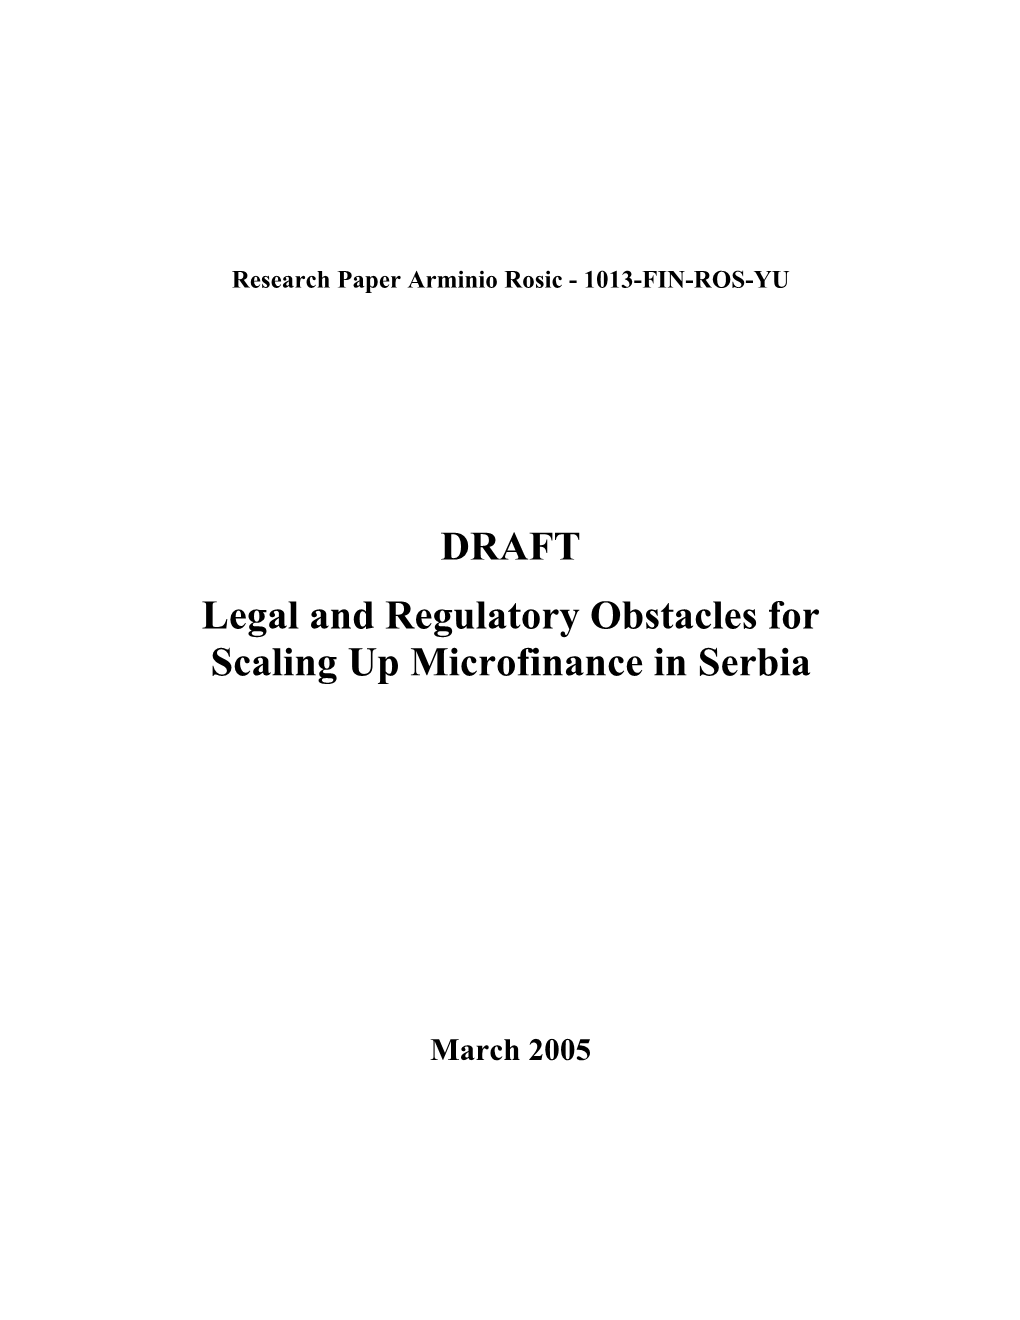 DRAFT Legal and Regulatory Obstacles for Scaling up Microfinance in Serbia